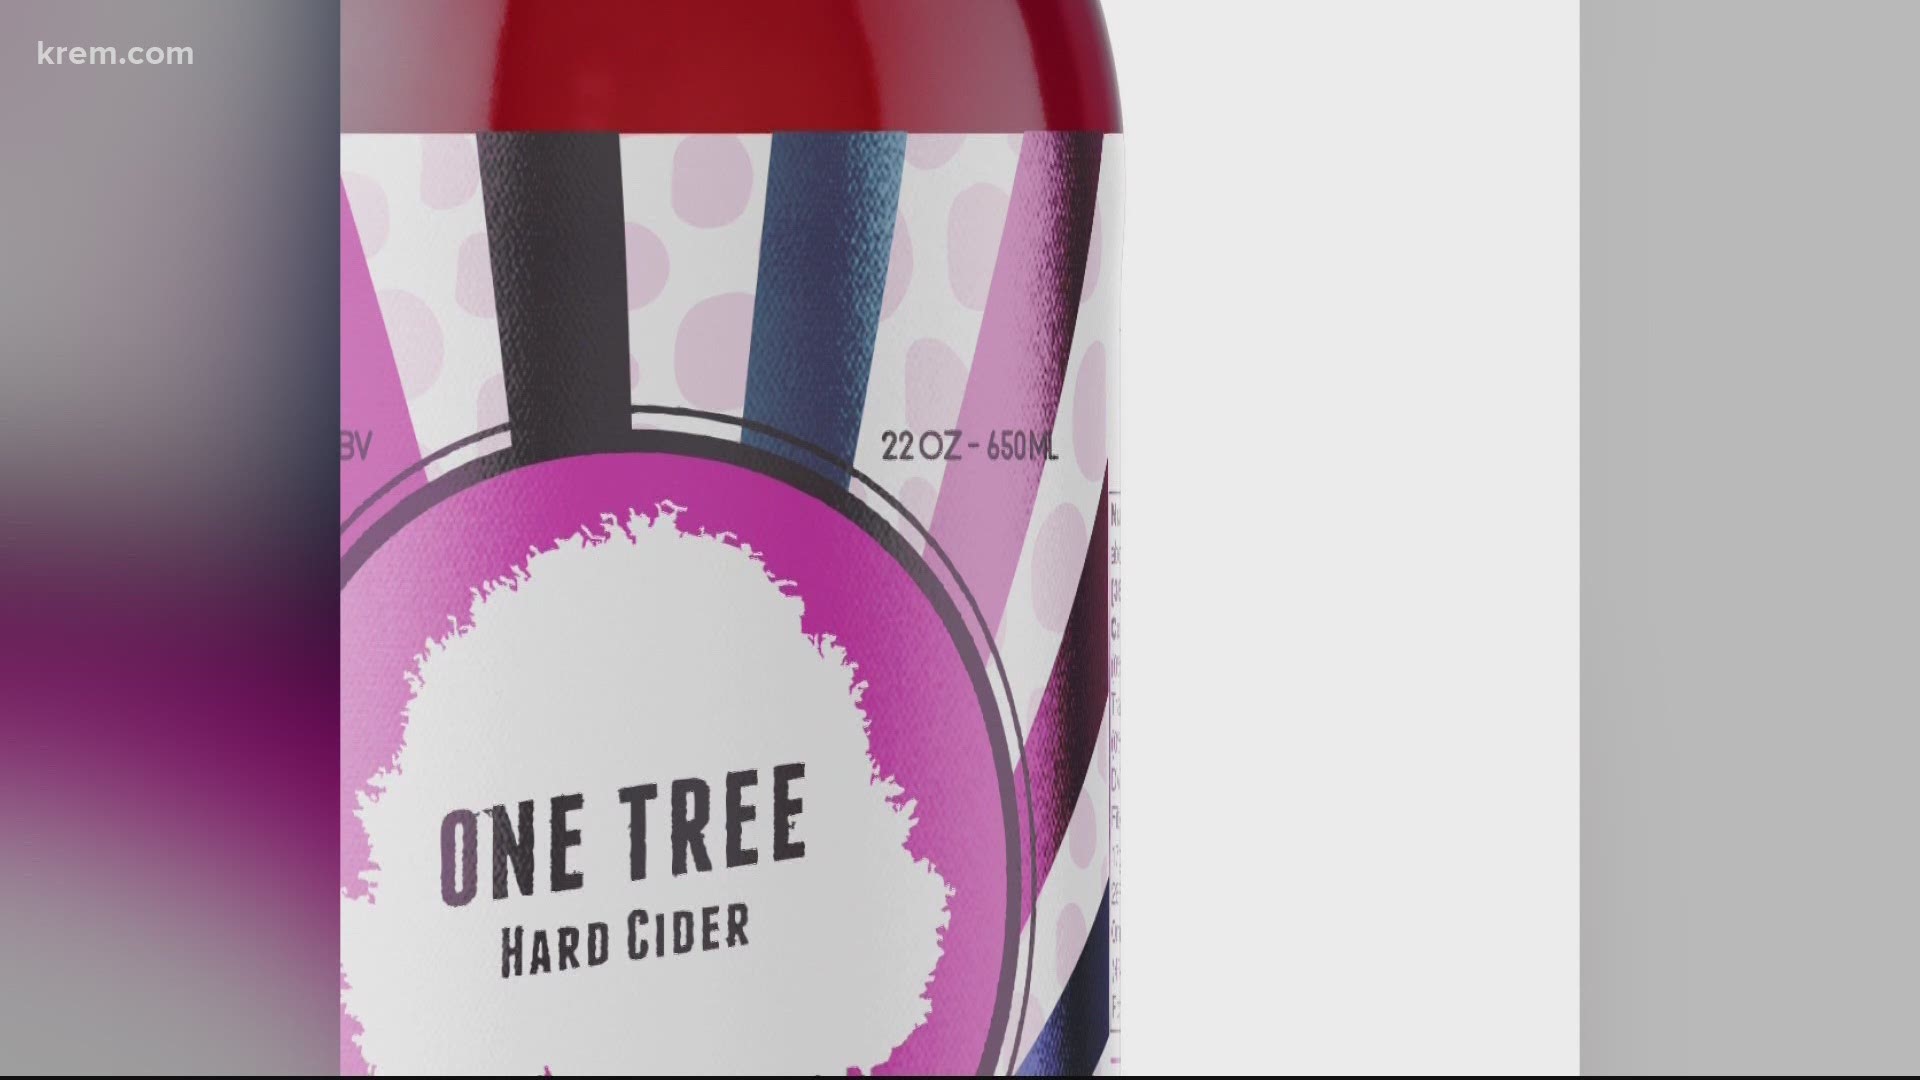 The cider house announced the newest addition to their flavor profile. Three more canned flavors will be announced this summer.